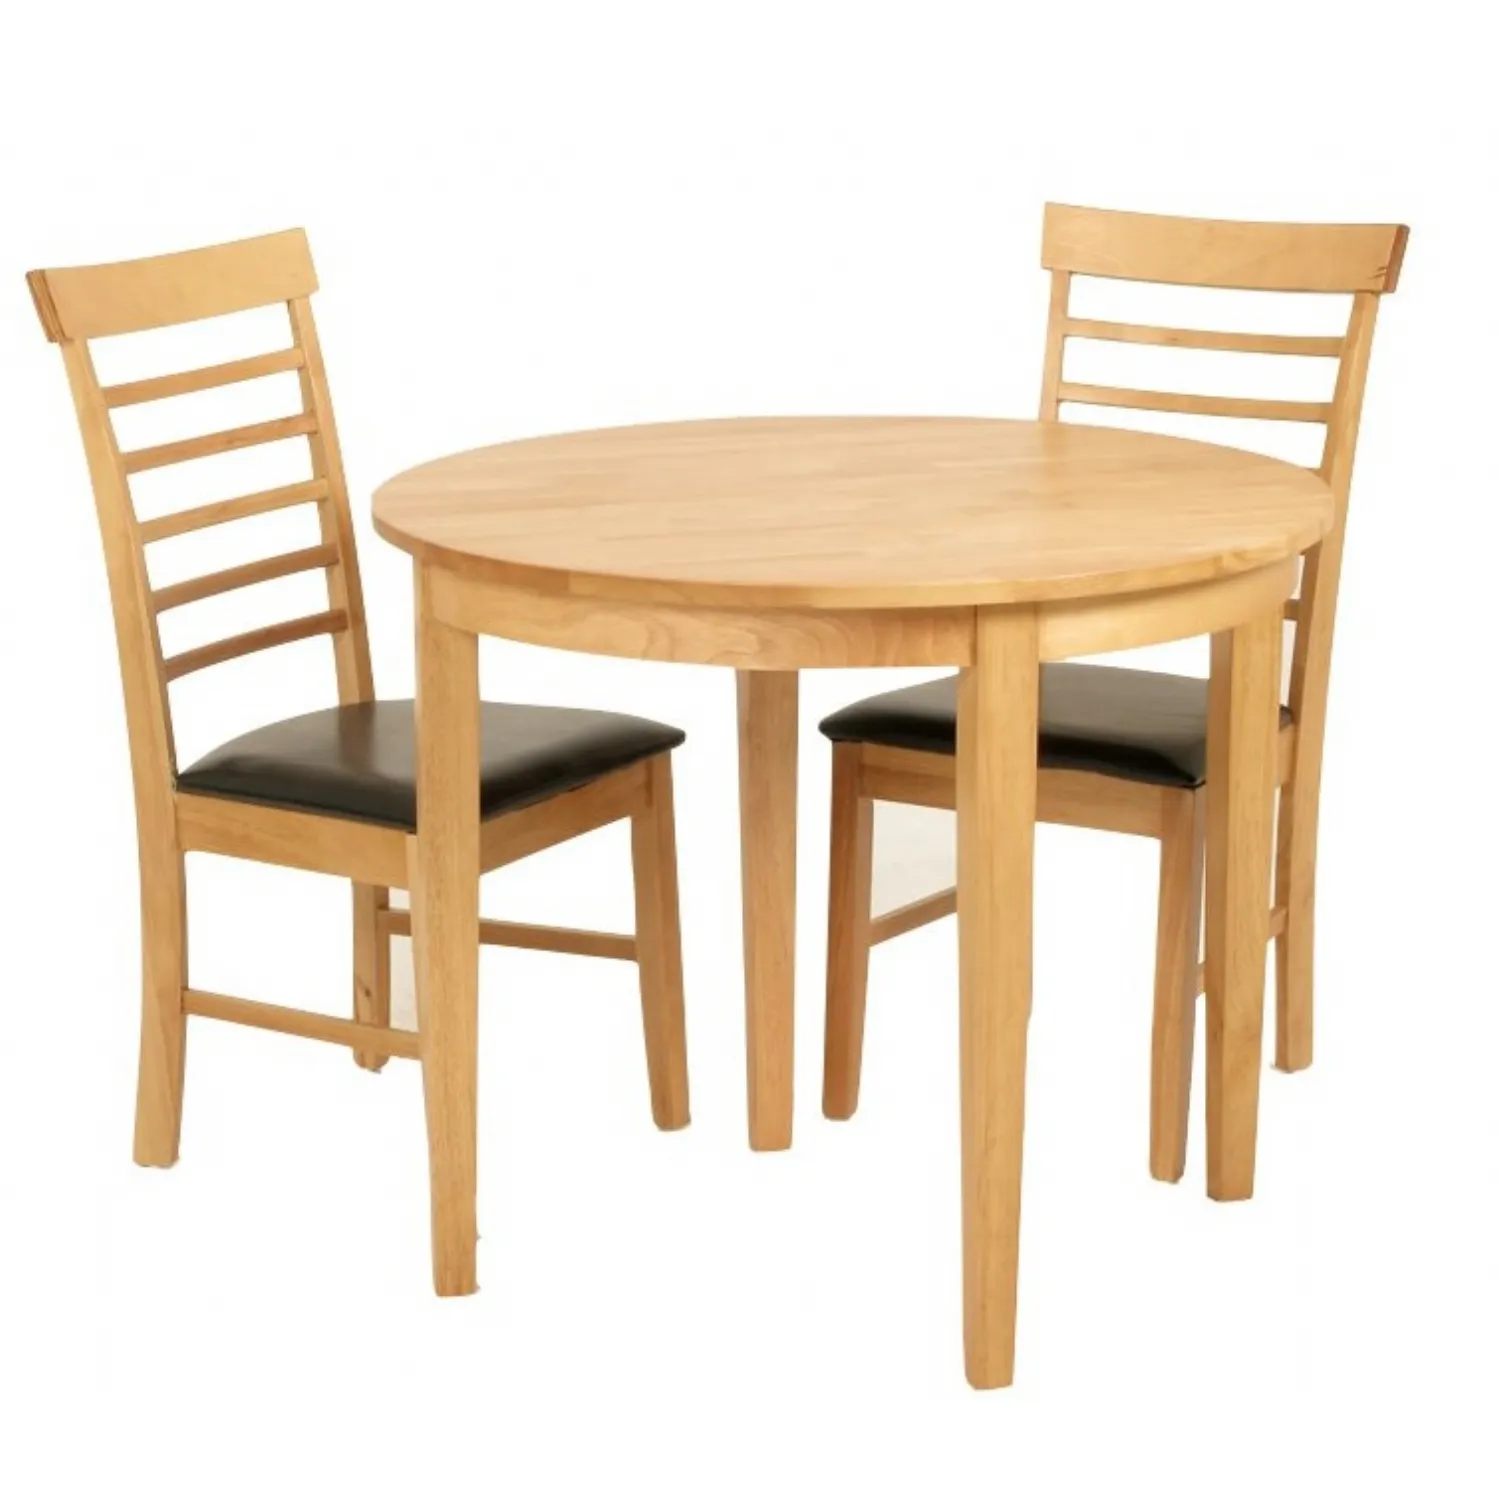 Light Oak Half Moon Extending Dining Table And 2 Chairs